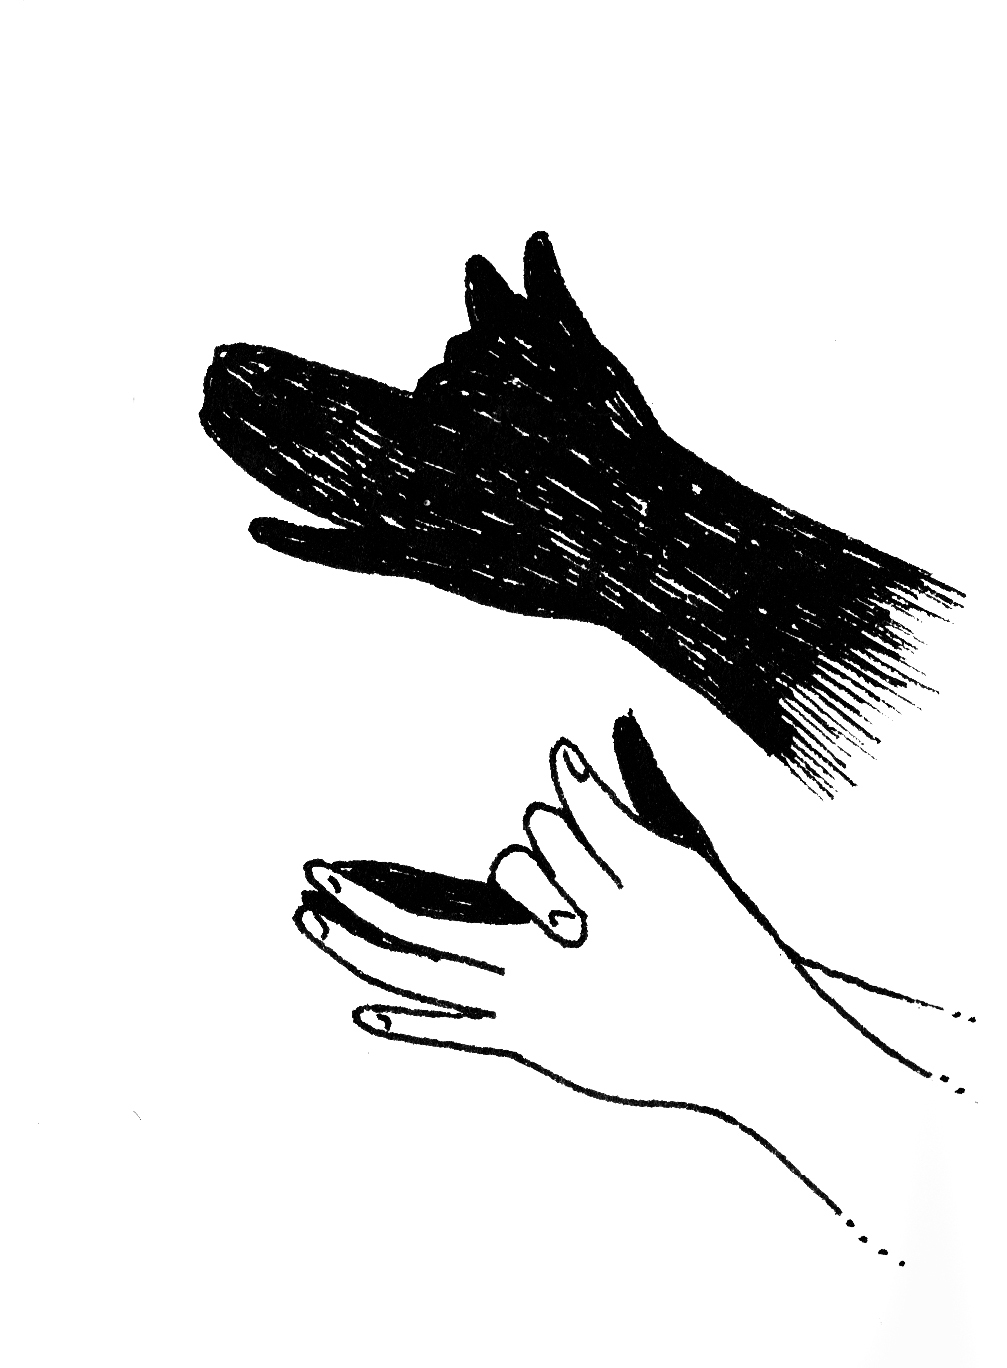 Shadow puppet of a dog